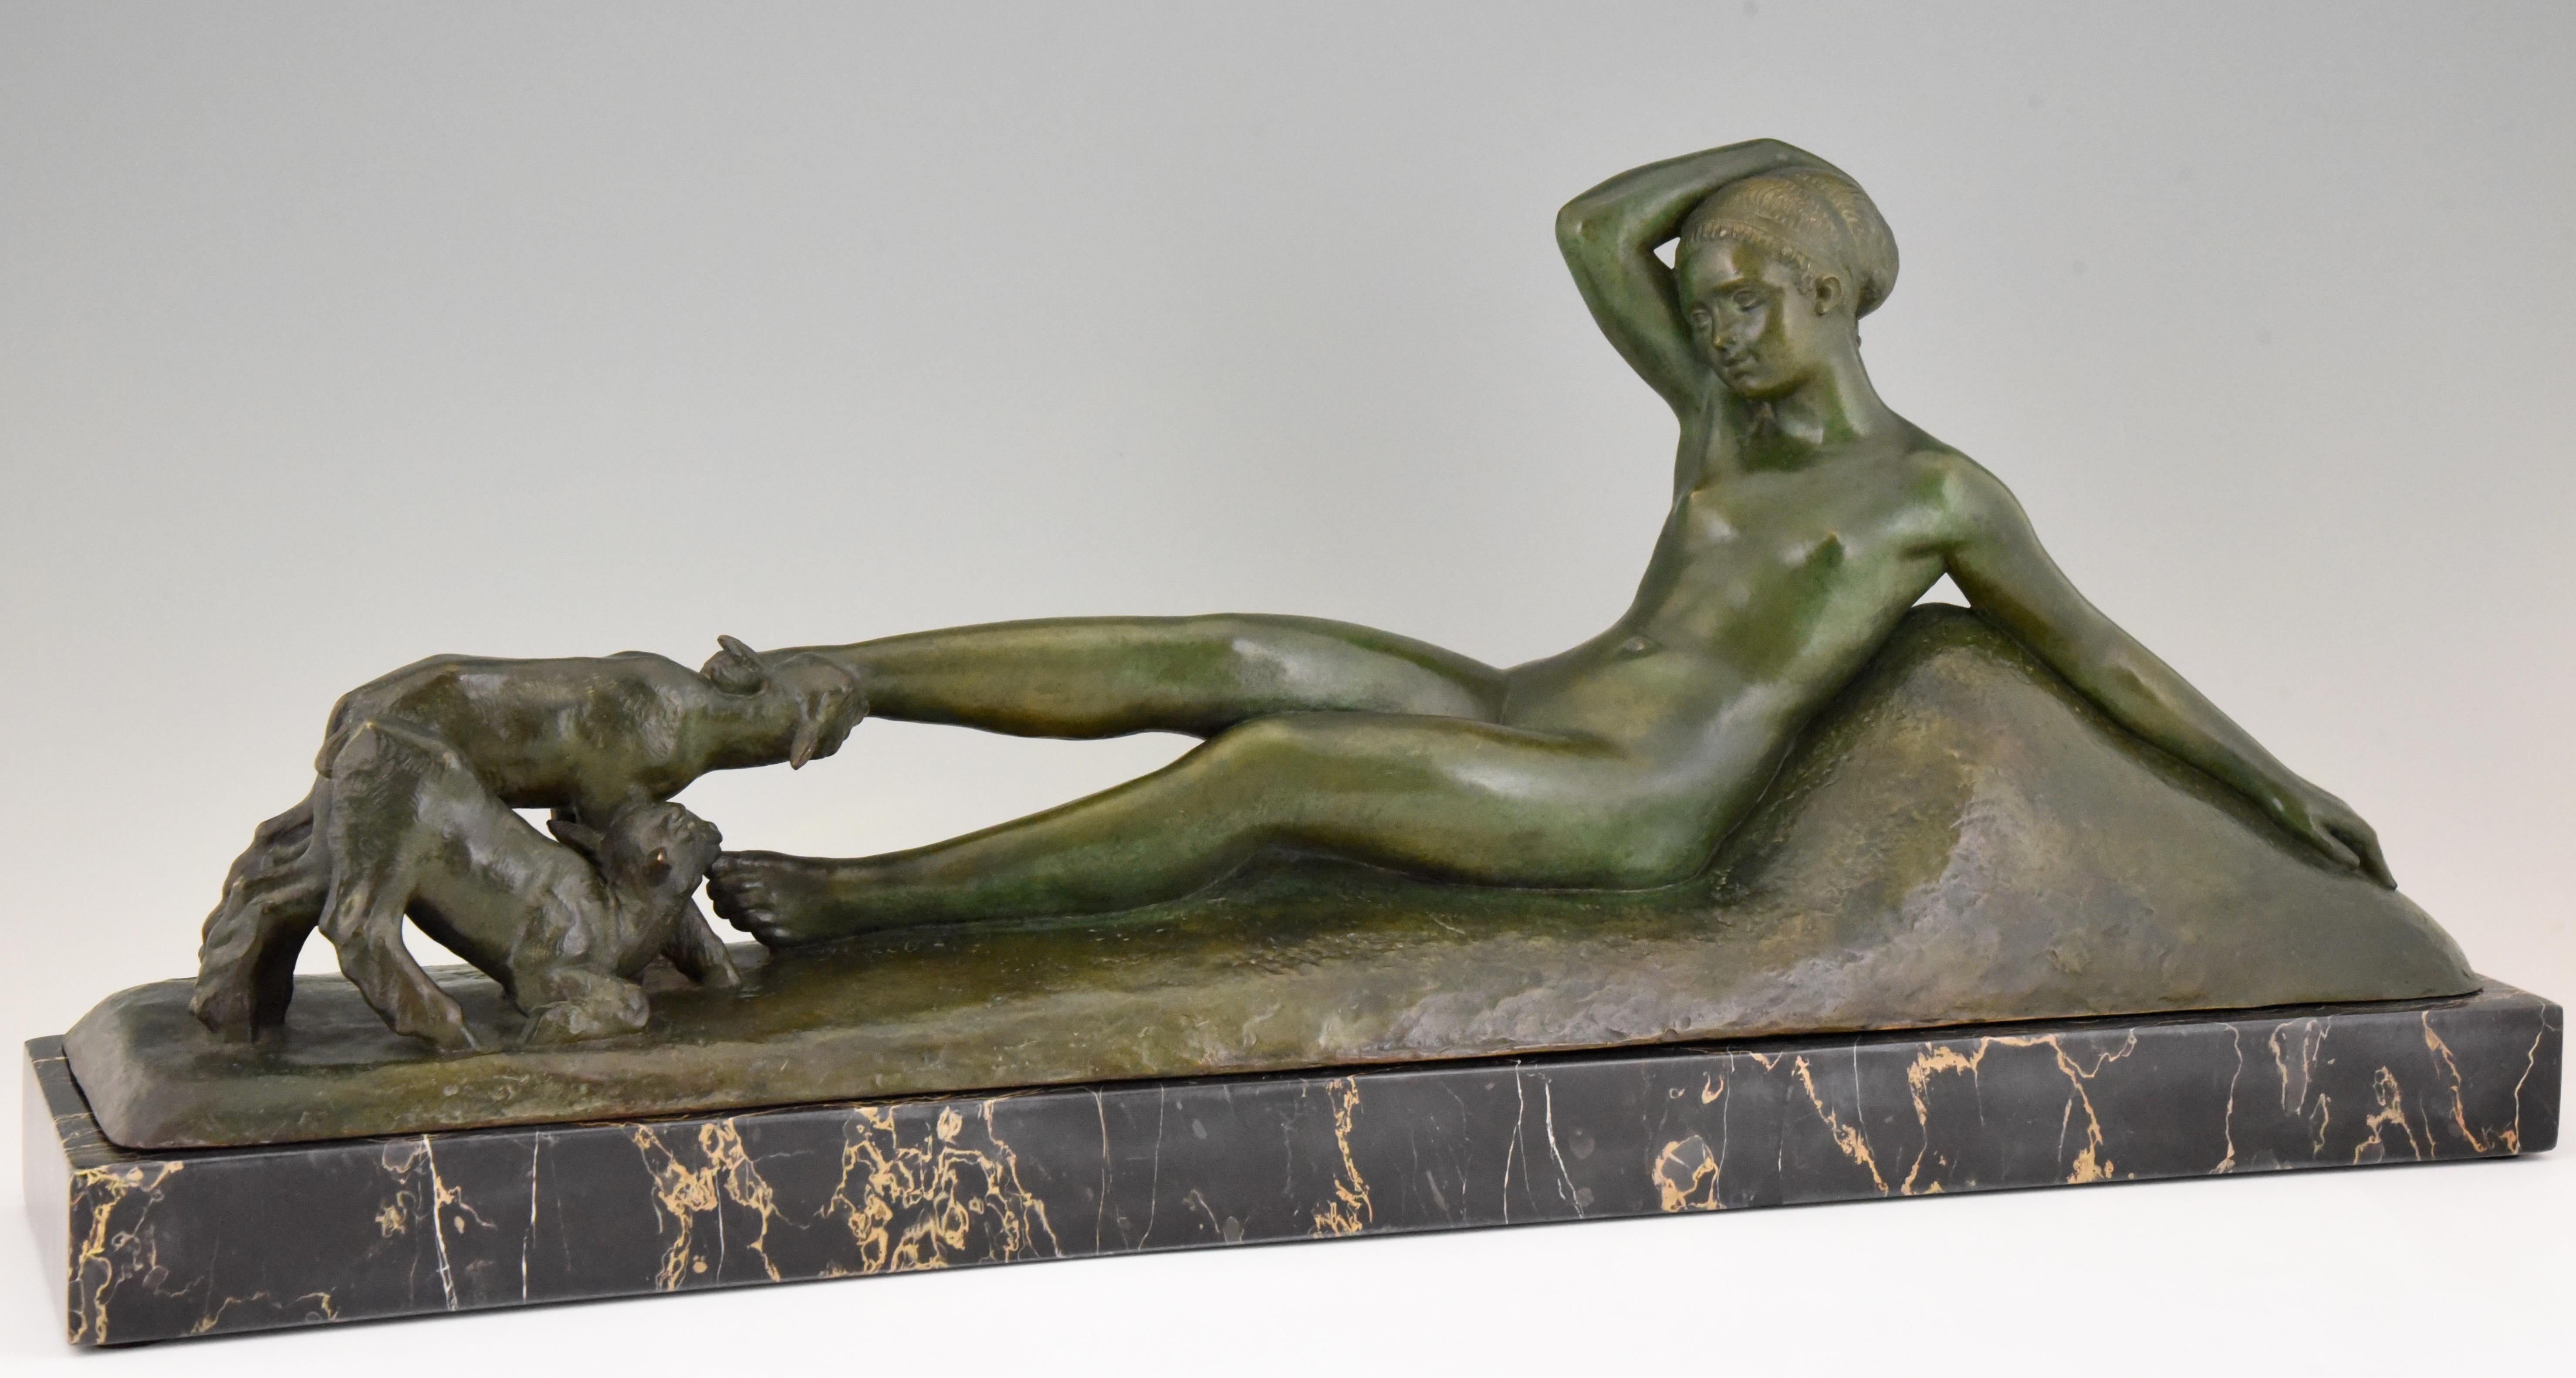 Impressive Art Deco bronze sculpture of a reclining nude playing with two goats. Signed by the French artist Georges Gori, with foundry mark La Pointe, lost wax technique, cire perdue. The bronze has a lovely green patina and stands on a Portor